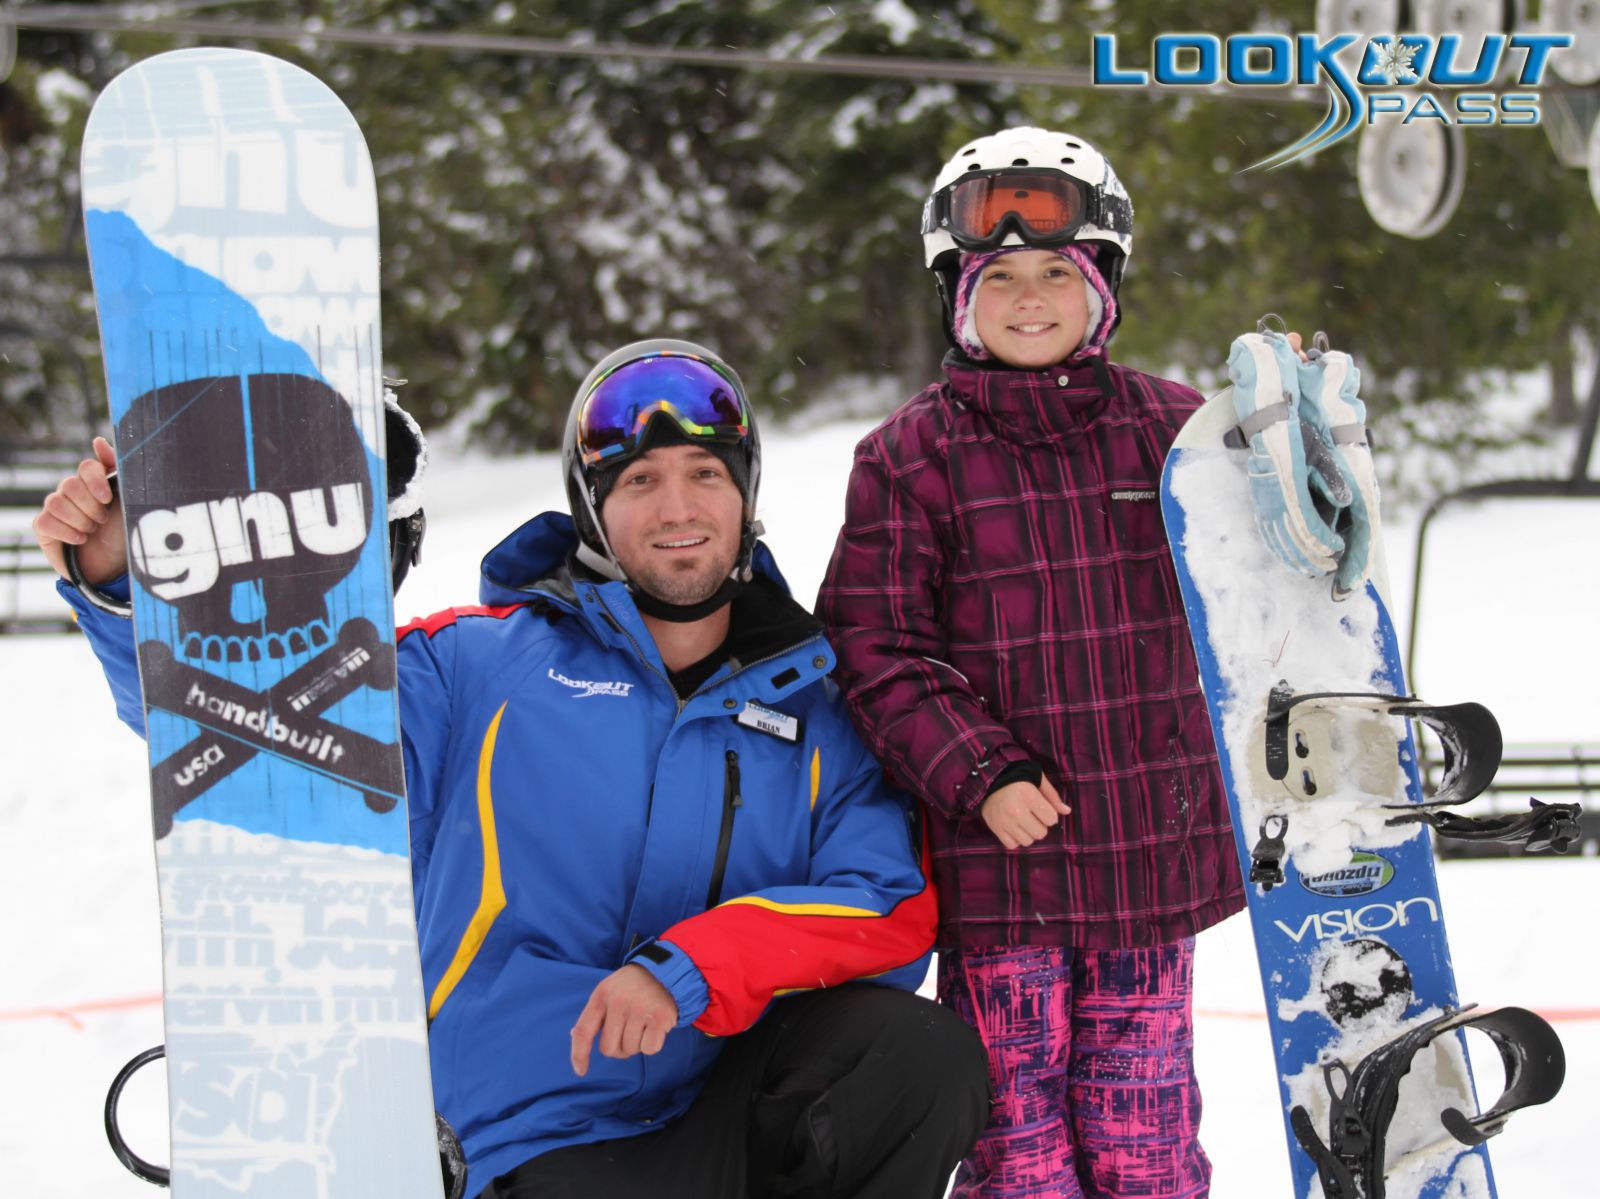 Enjoying snowboard lessons at Lookout